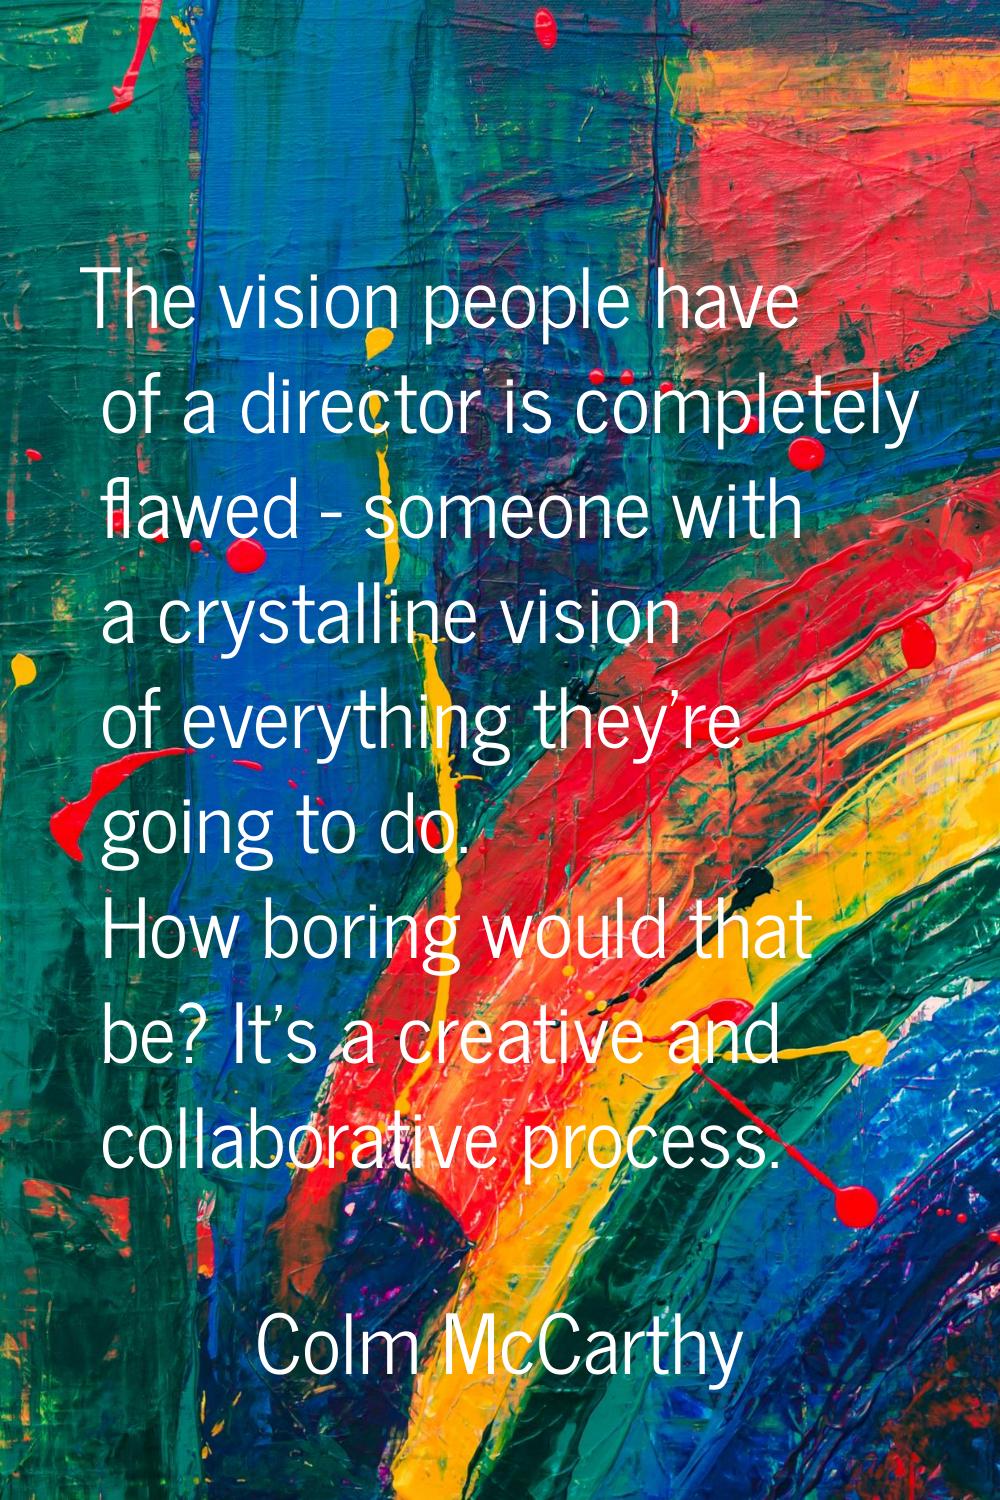 The vision people have of a director is completely flawed - someone with a crystalline vision of ev